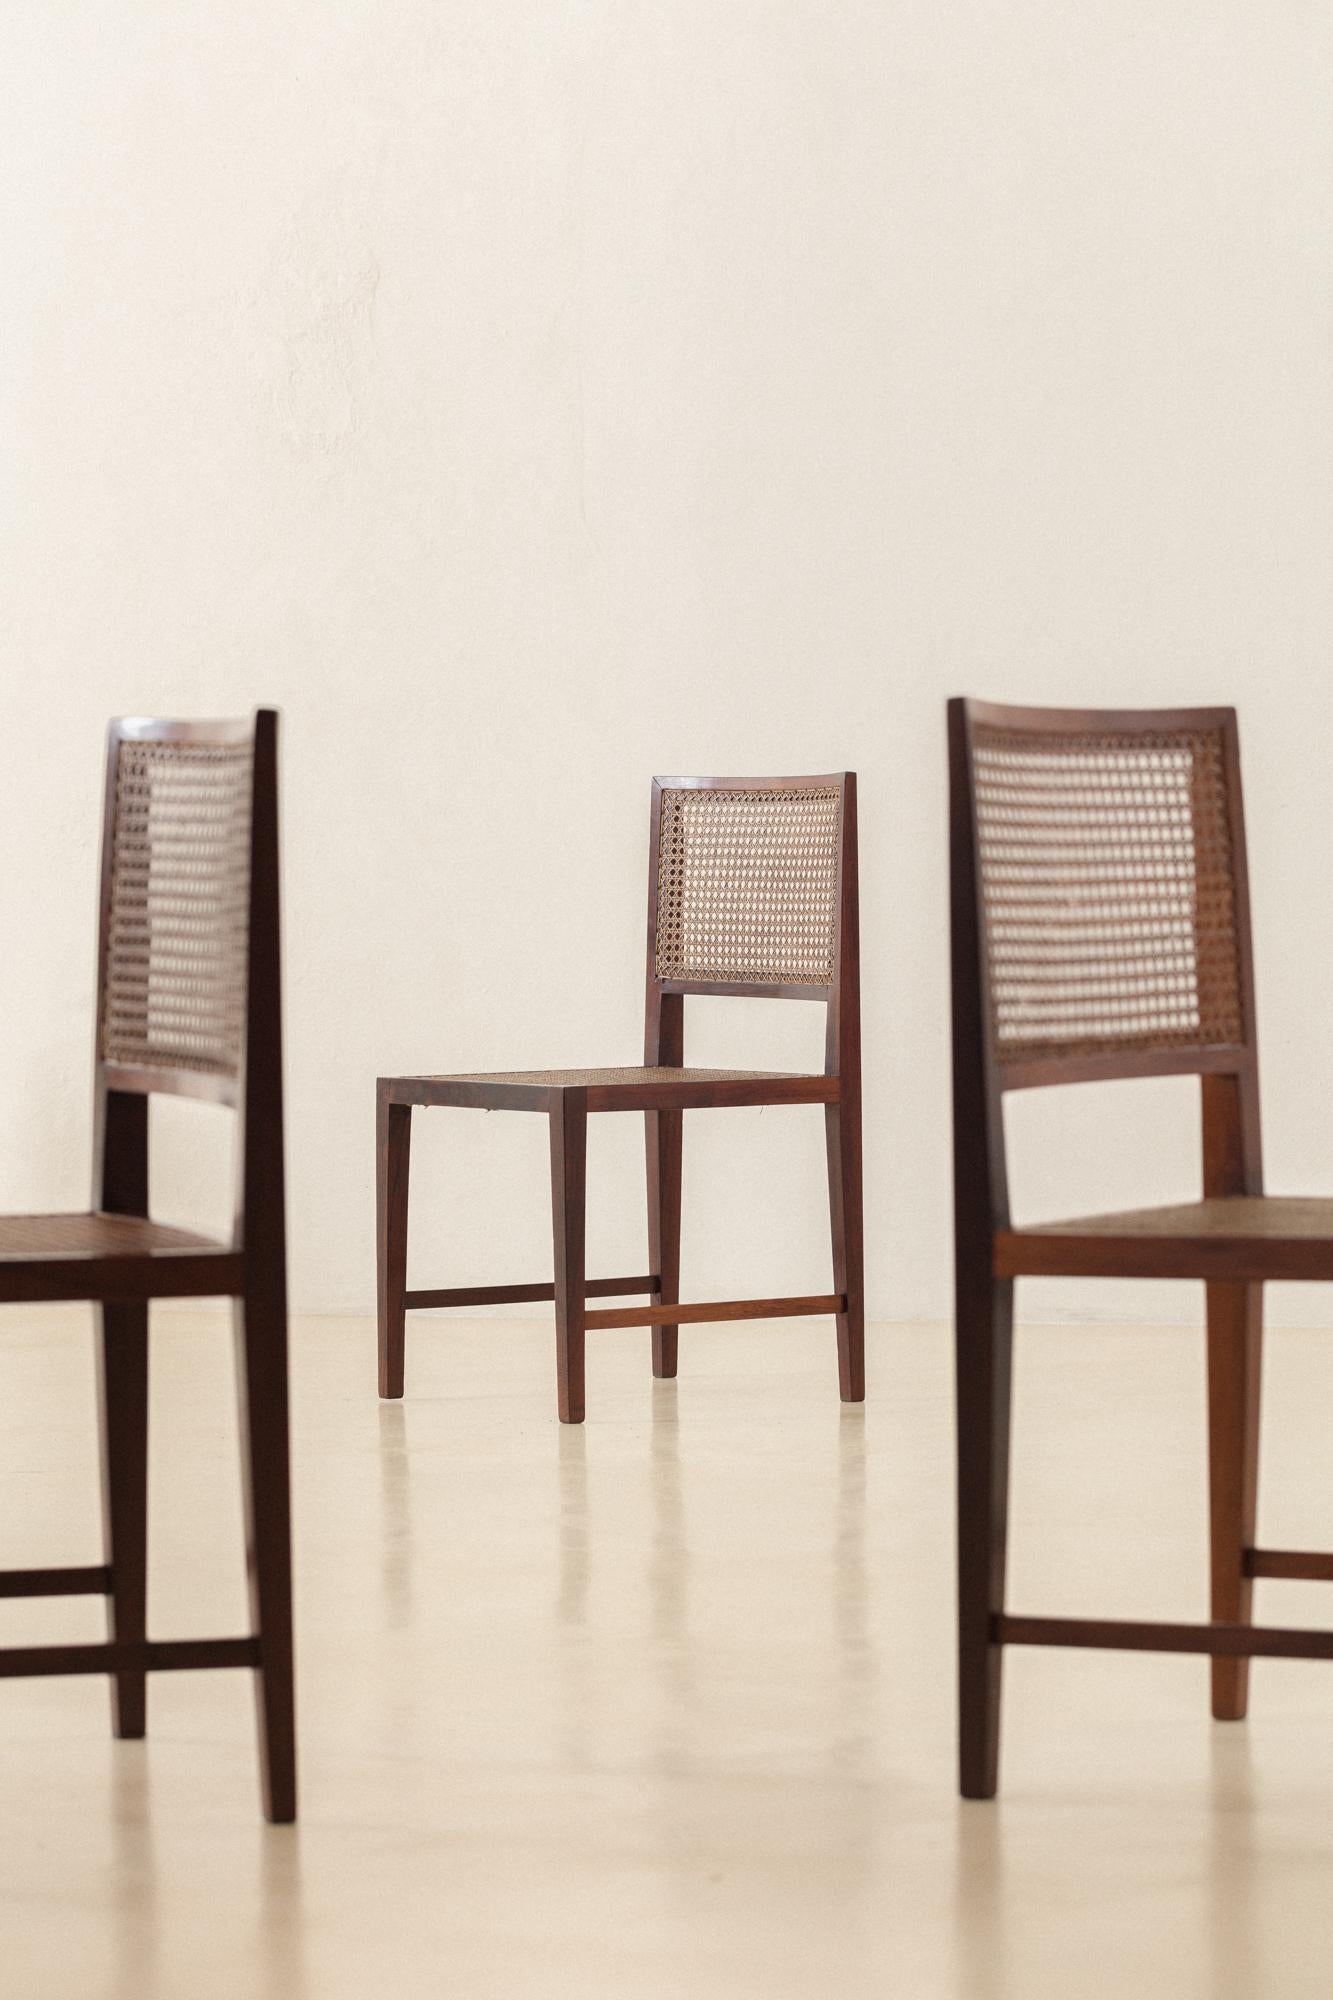 Mid-Century Modern Rosewood and Cane Dining Chairs, M.L. Magalhães, 1960s, Midcentury Brazilian